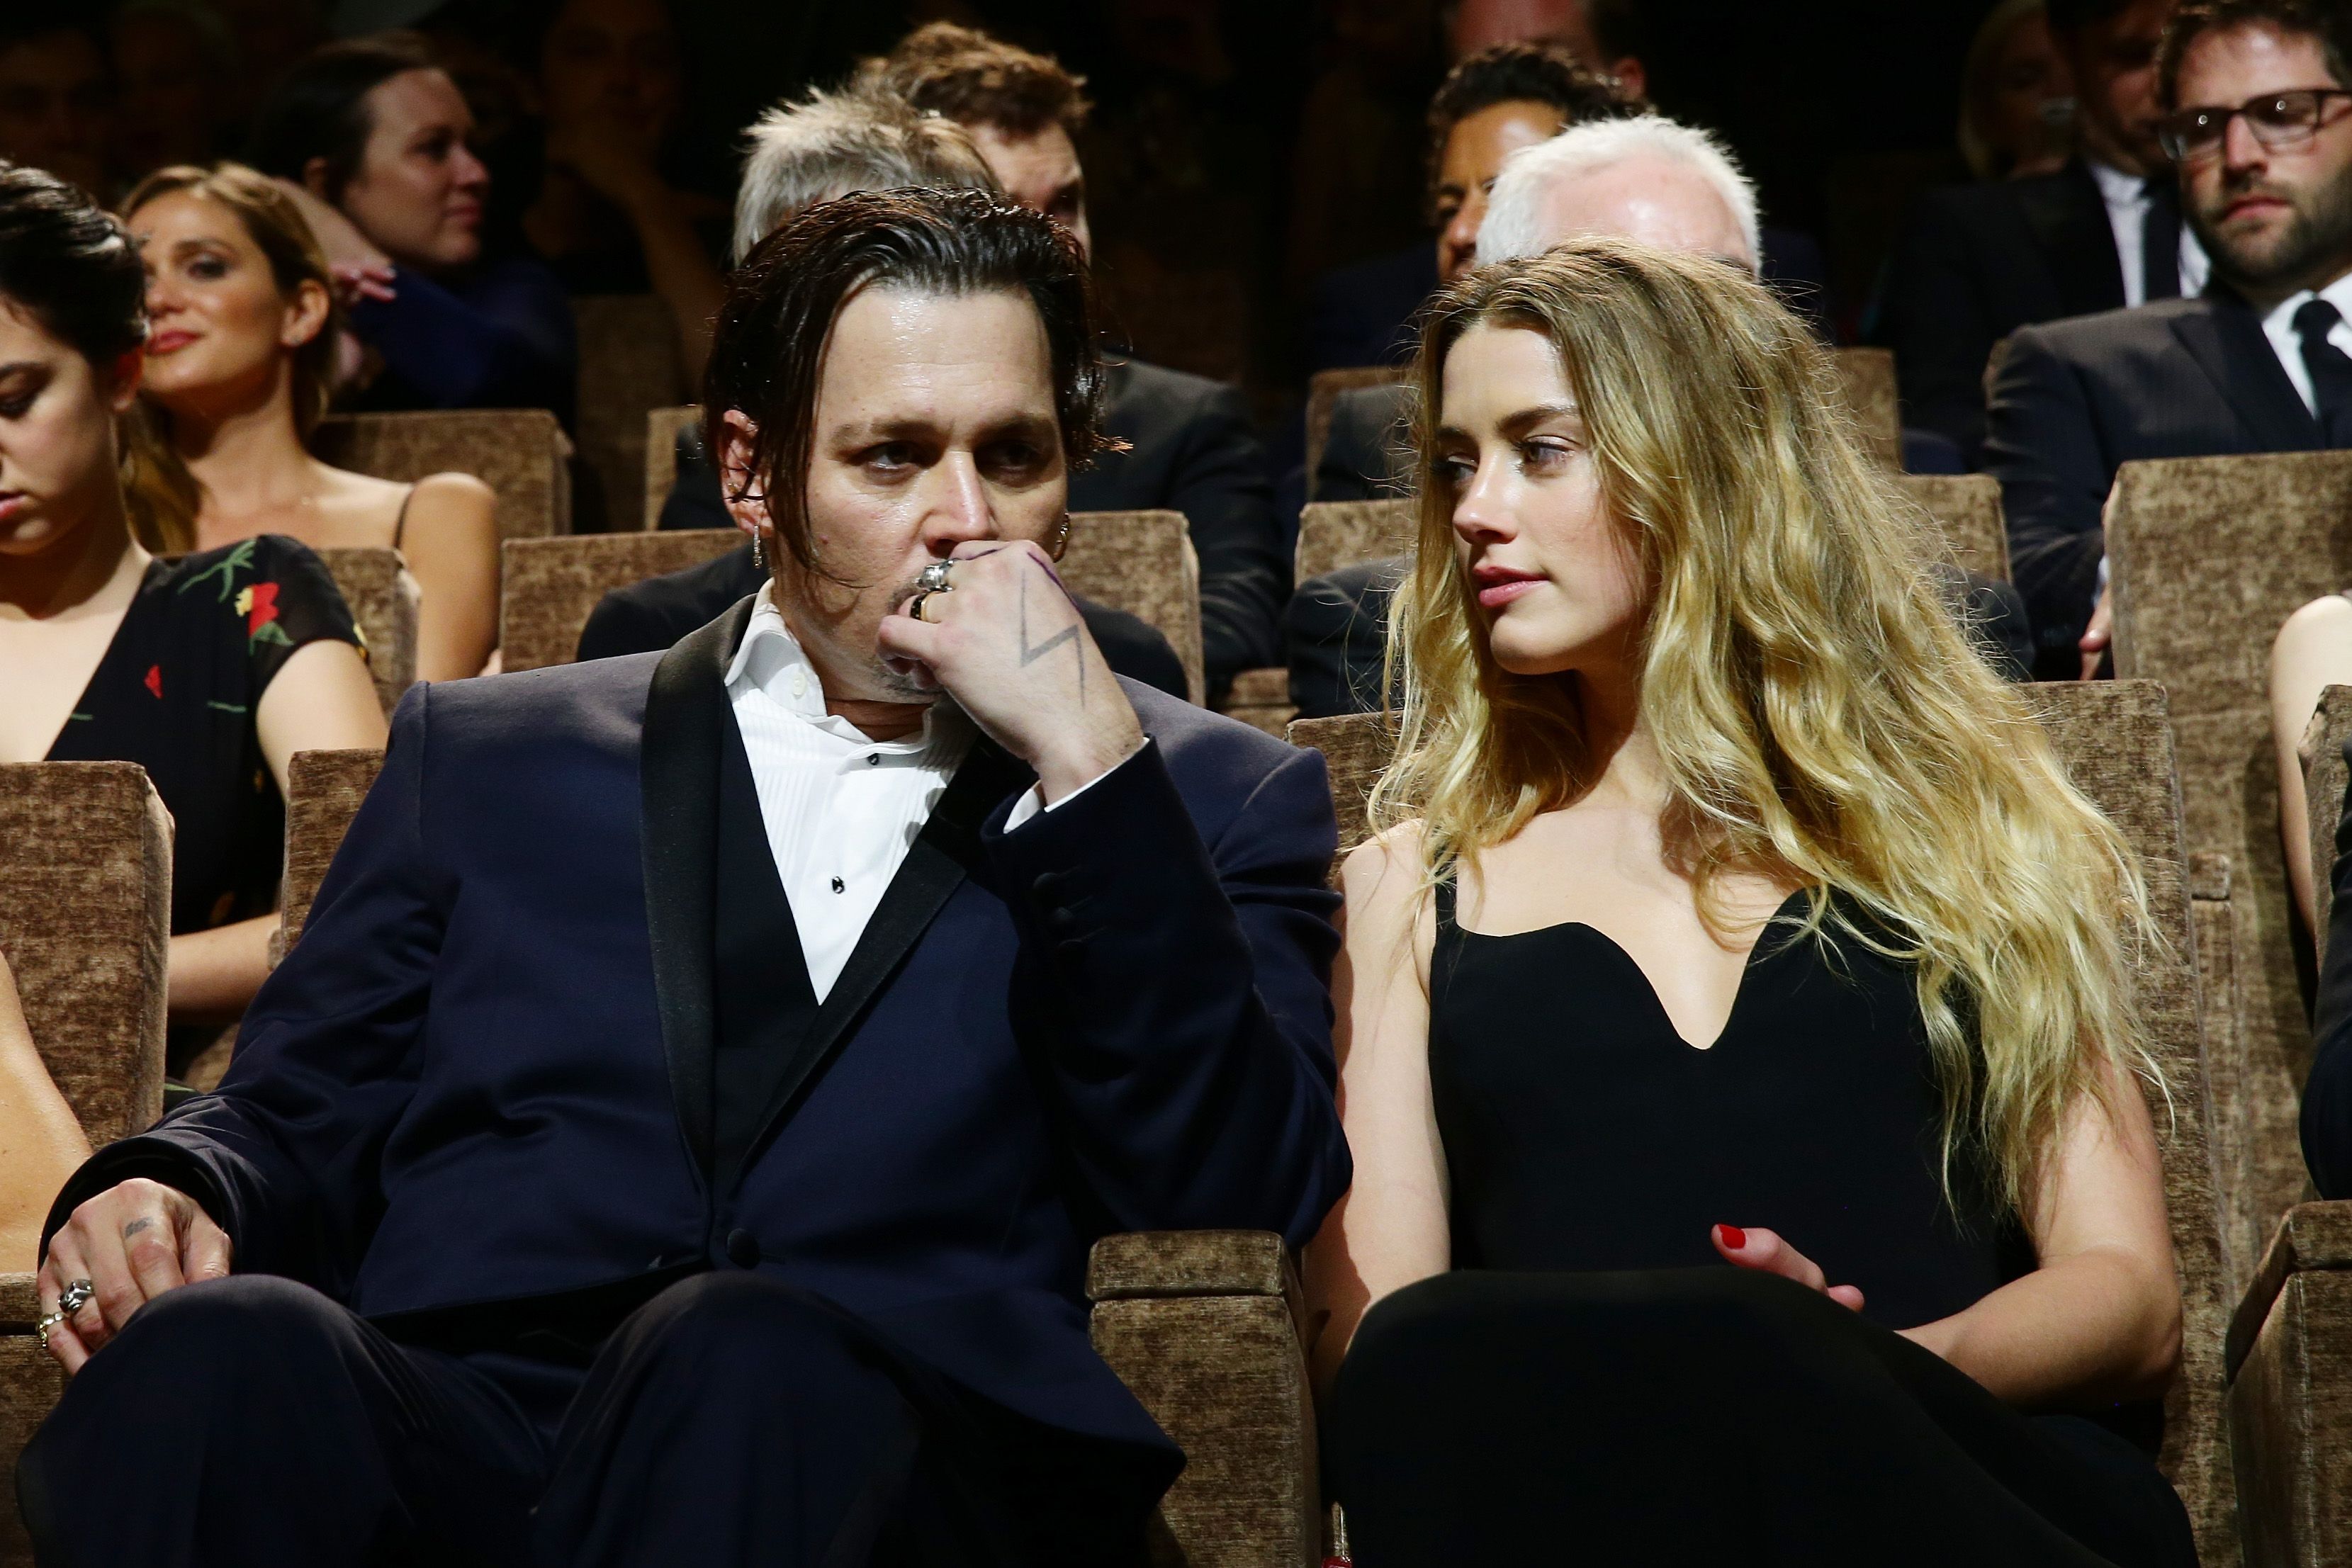 Johnny Depp and Amber Heard at a premiere for "Black Mass" during the 72nd Venice Film Festival on September 4, 2015, in Italy | Photo: Vittorio Zunino Celotto/Getty Images